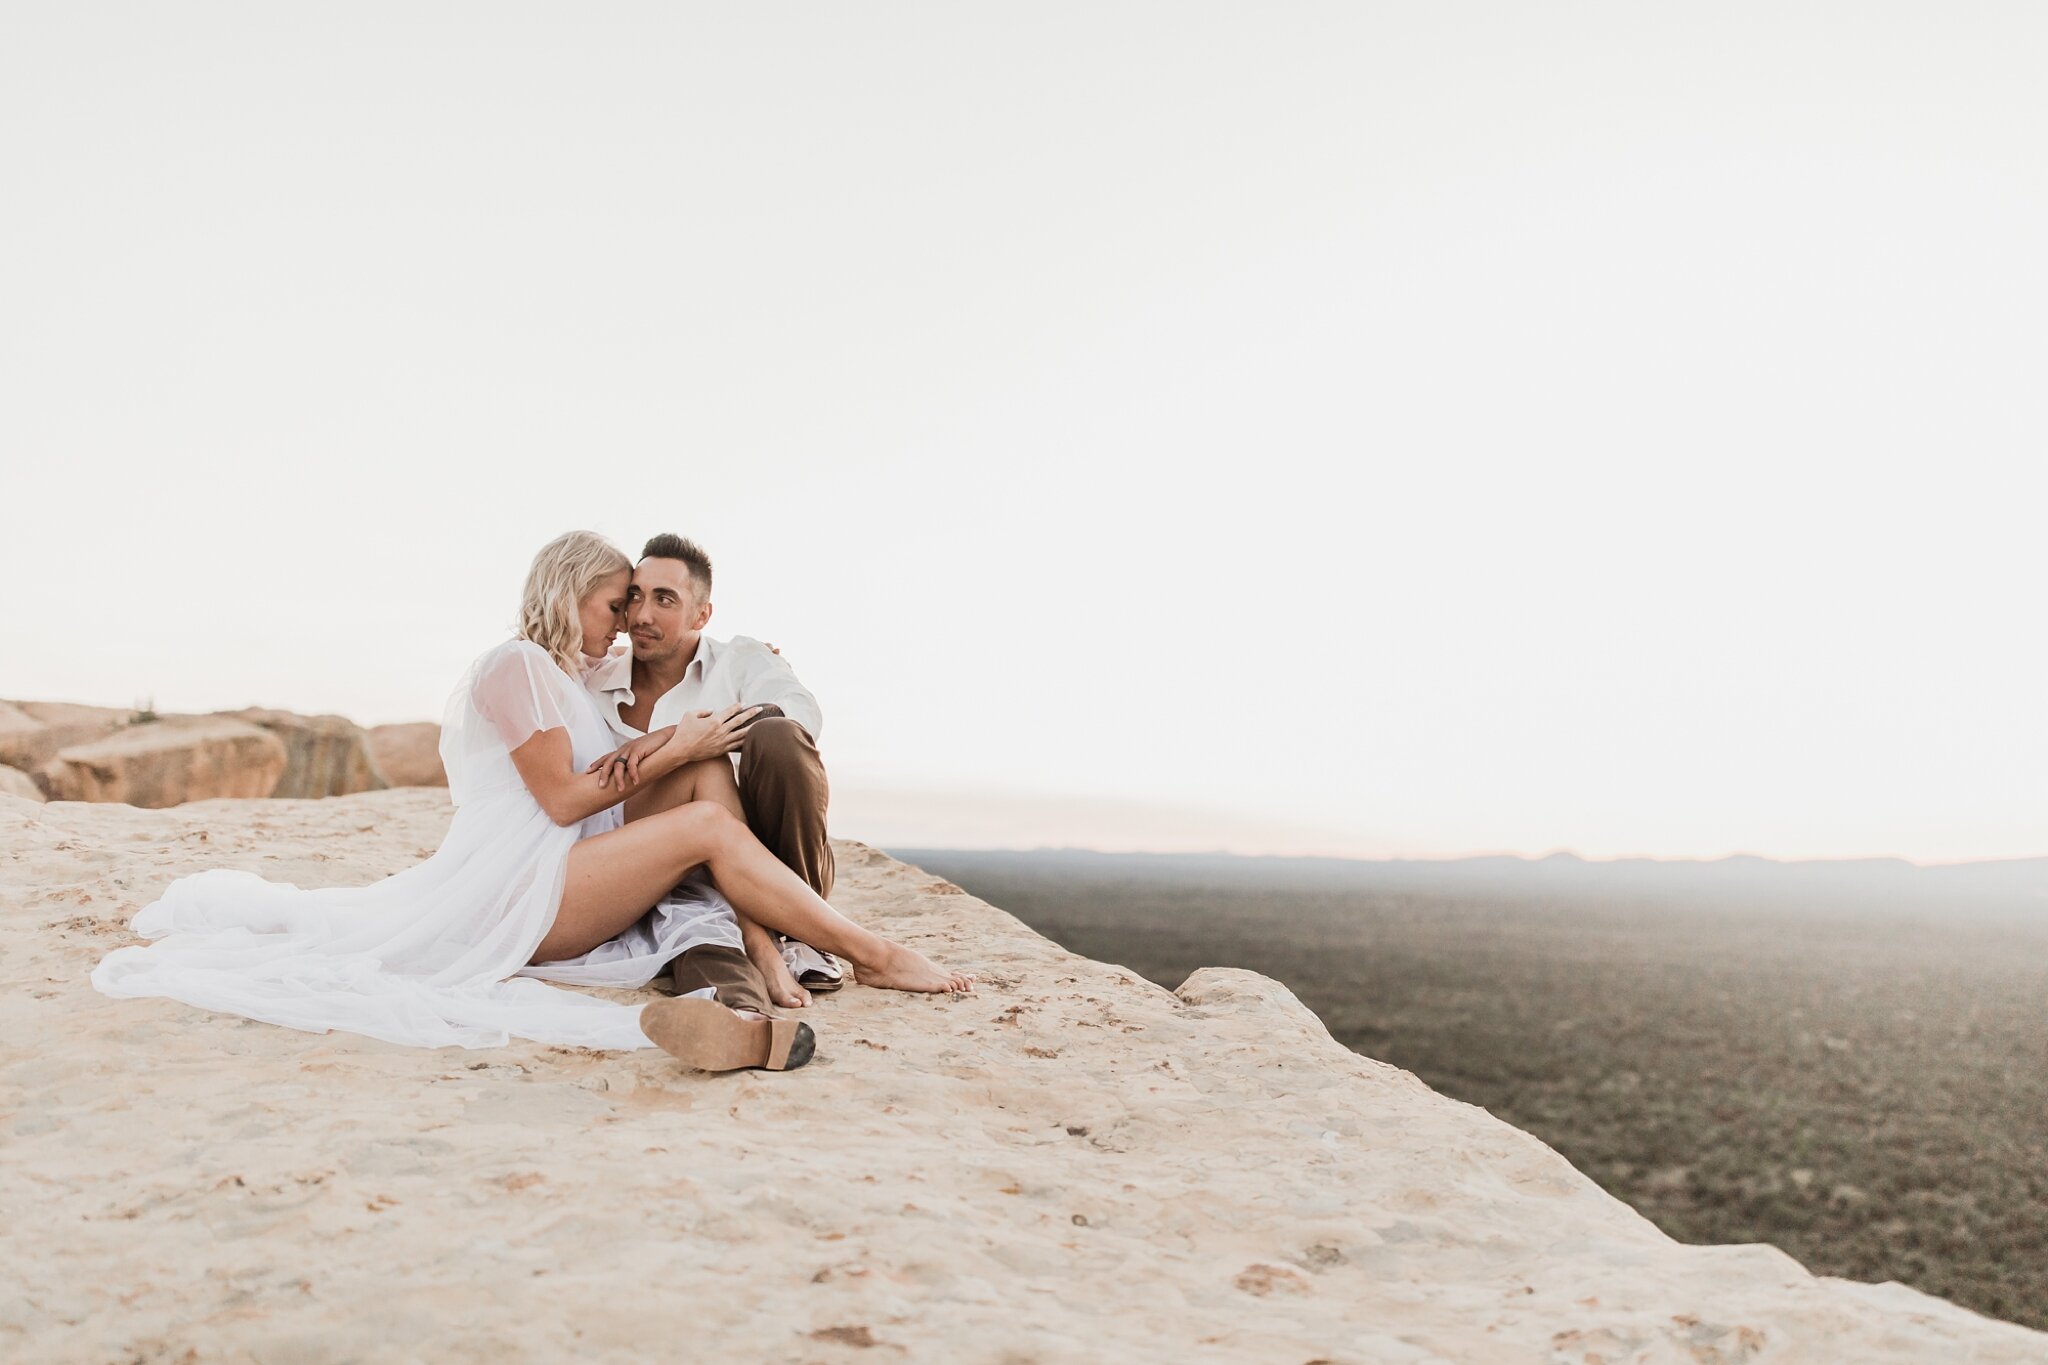 Alicia+lucia+photography+-+albuquerque+wedding+photographer+-+santa+fe+wedding+photography+-+new+mexico+wedding+photographer+-+new+mexico+wedding+-+anniversary+-+styled+anniversary+-+elopement+-+styled+elopement_0052.jpg